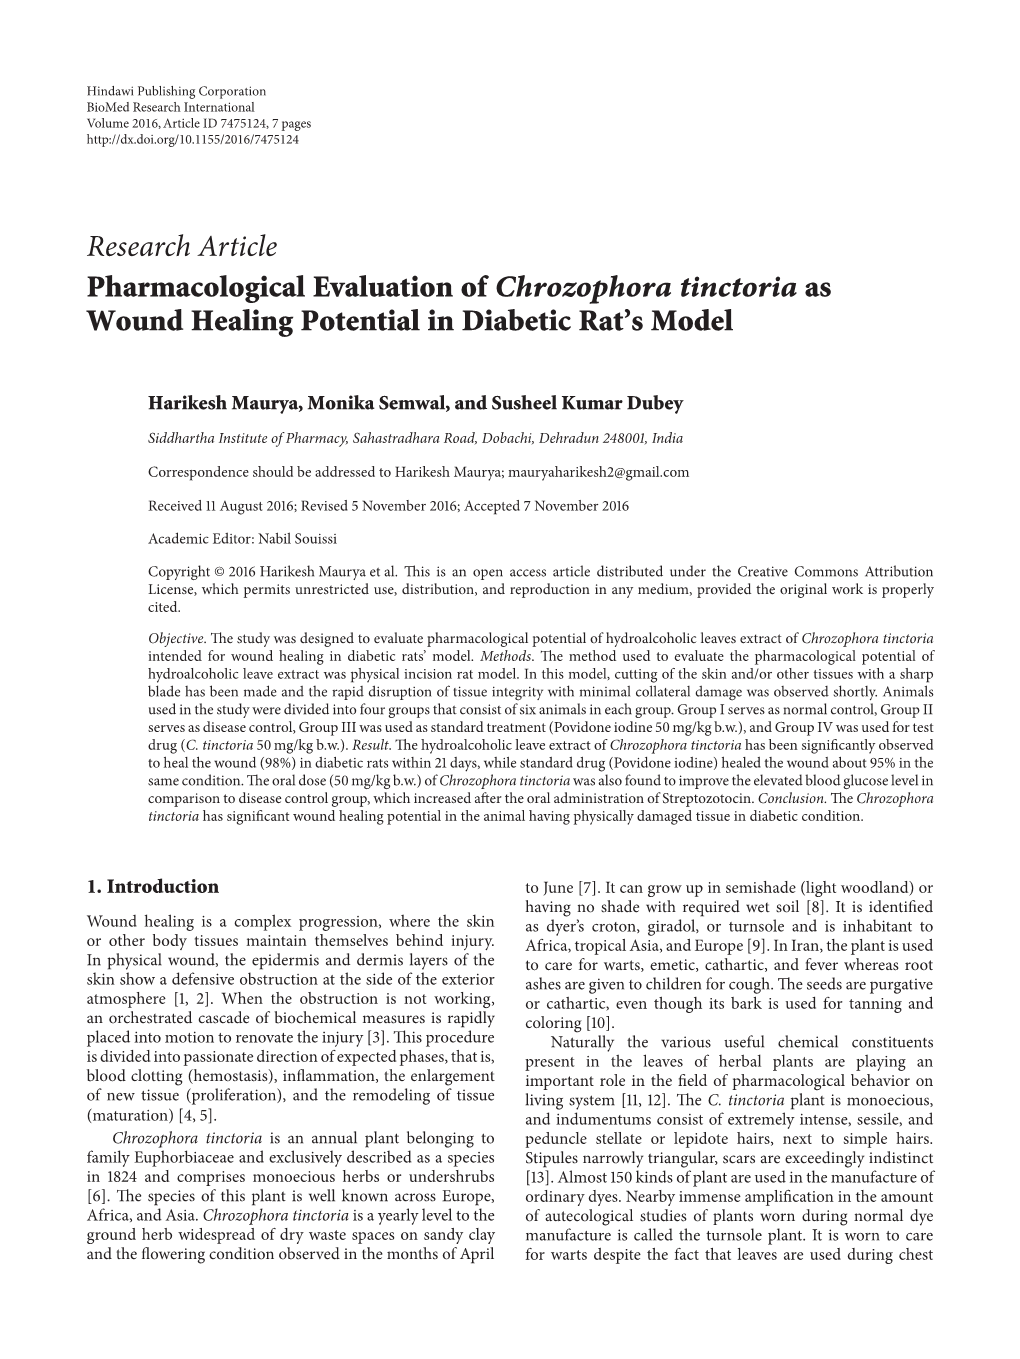 Pharmacological Evaluation of Chrozophora Tinctoria As Wound Healing Potential in Diabetic Rat’S Model